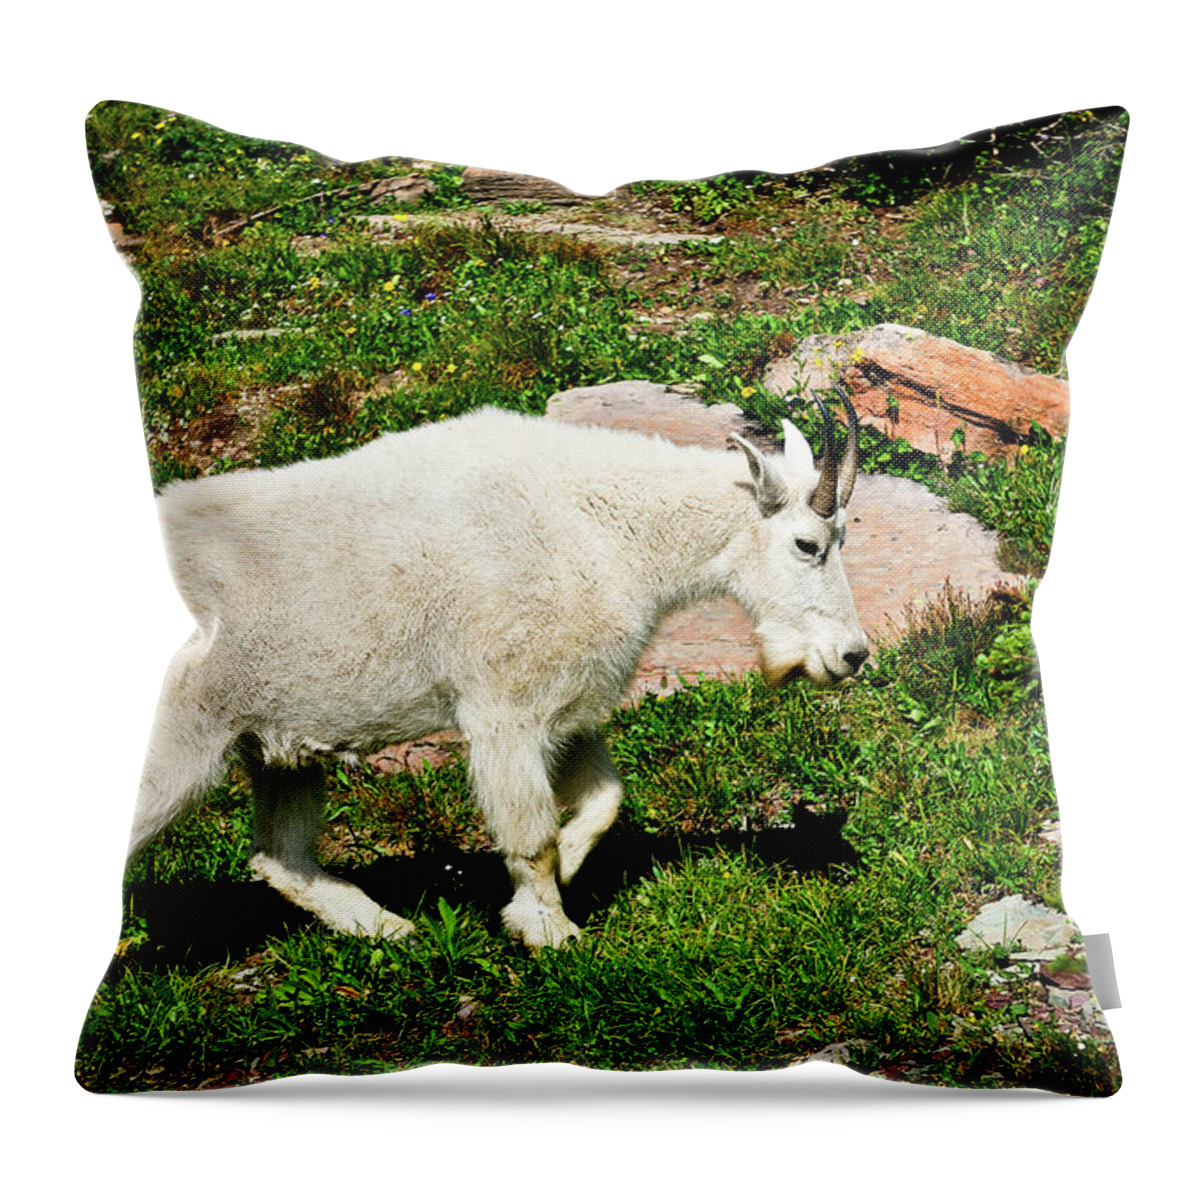 Glacier National Park Throw Pillow featuring the photograph Mountain Goat by Greg Norrell